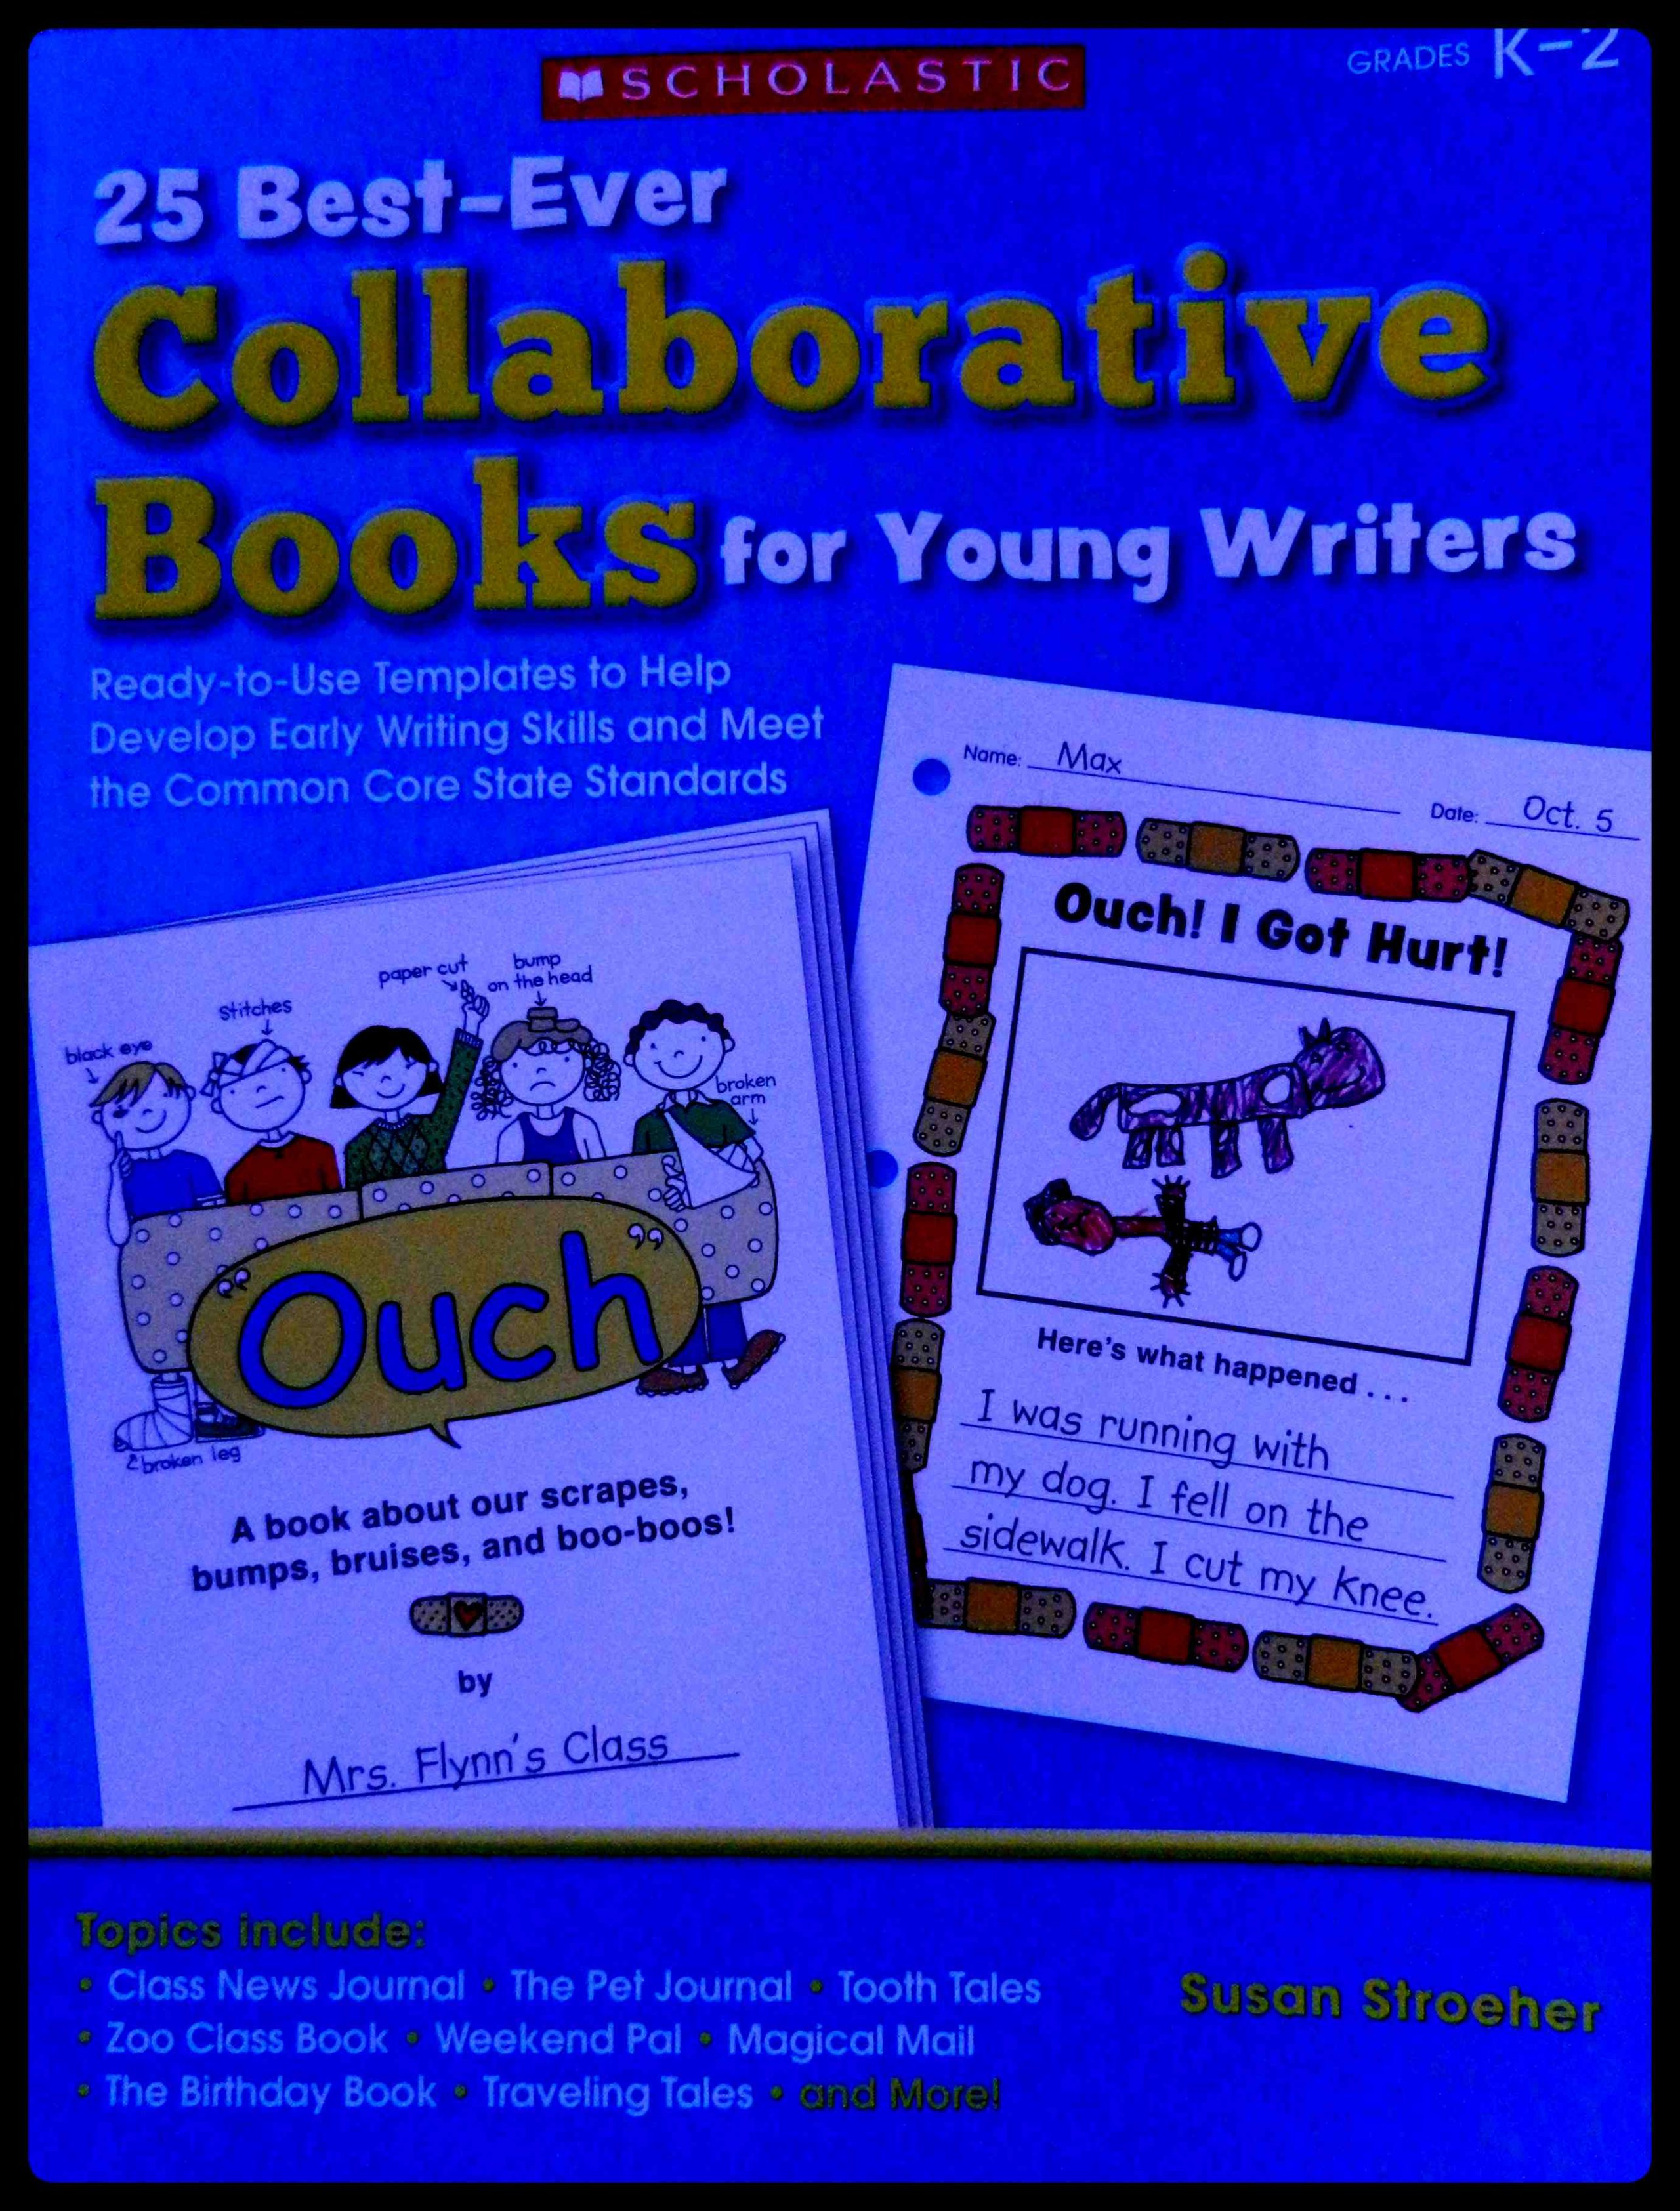 Collaborative Books for Young Writers – My Review